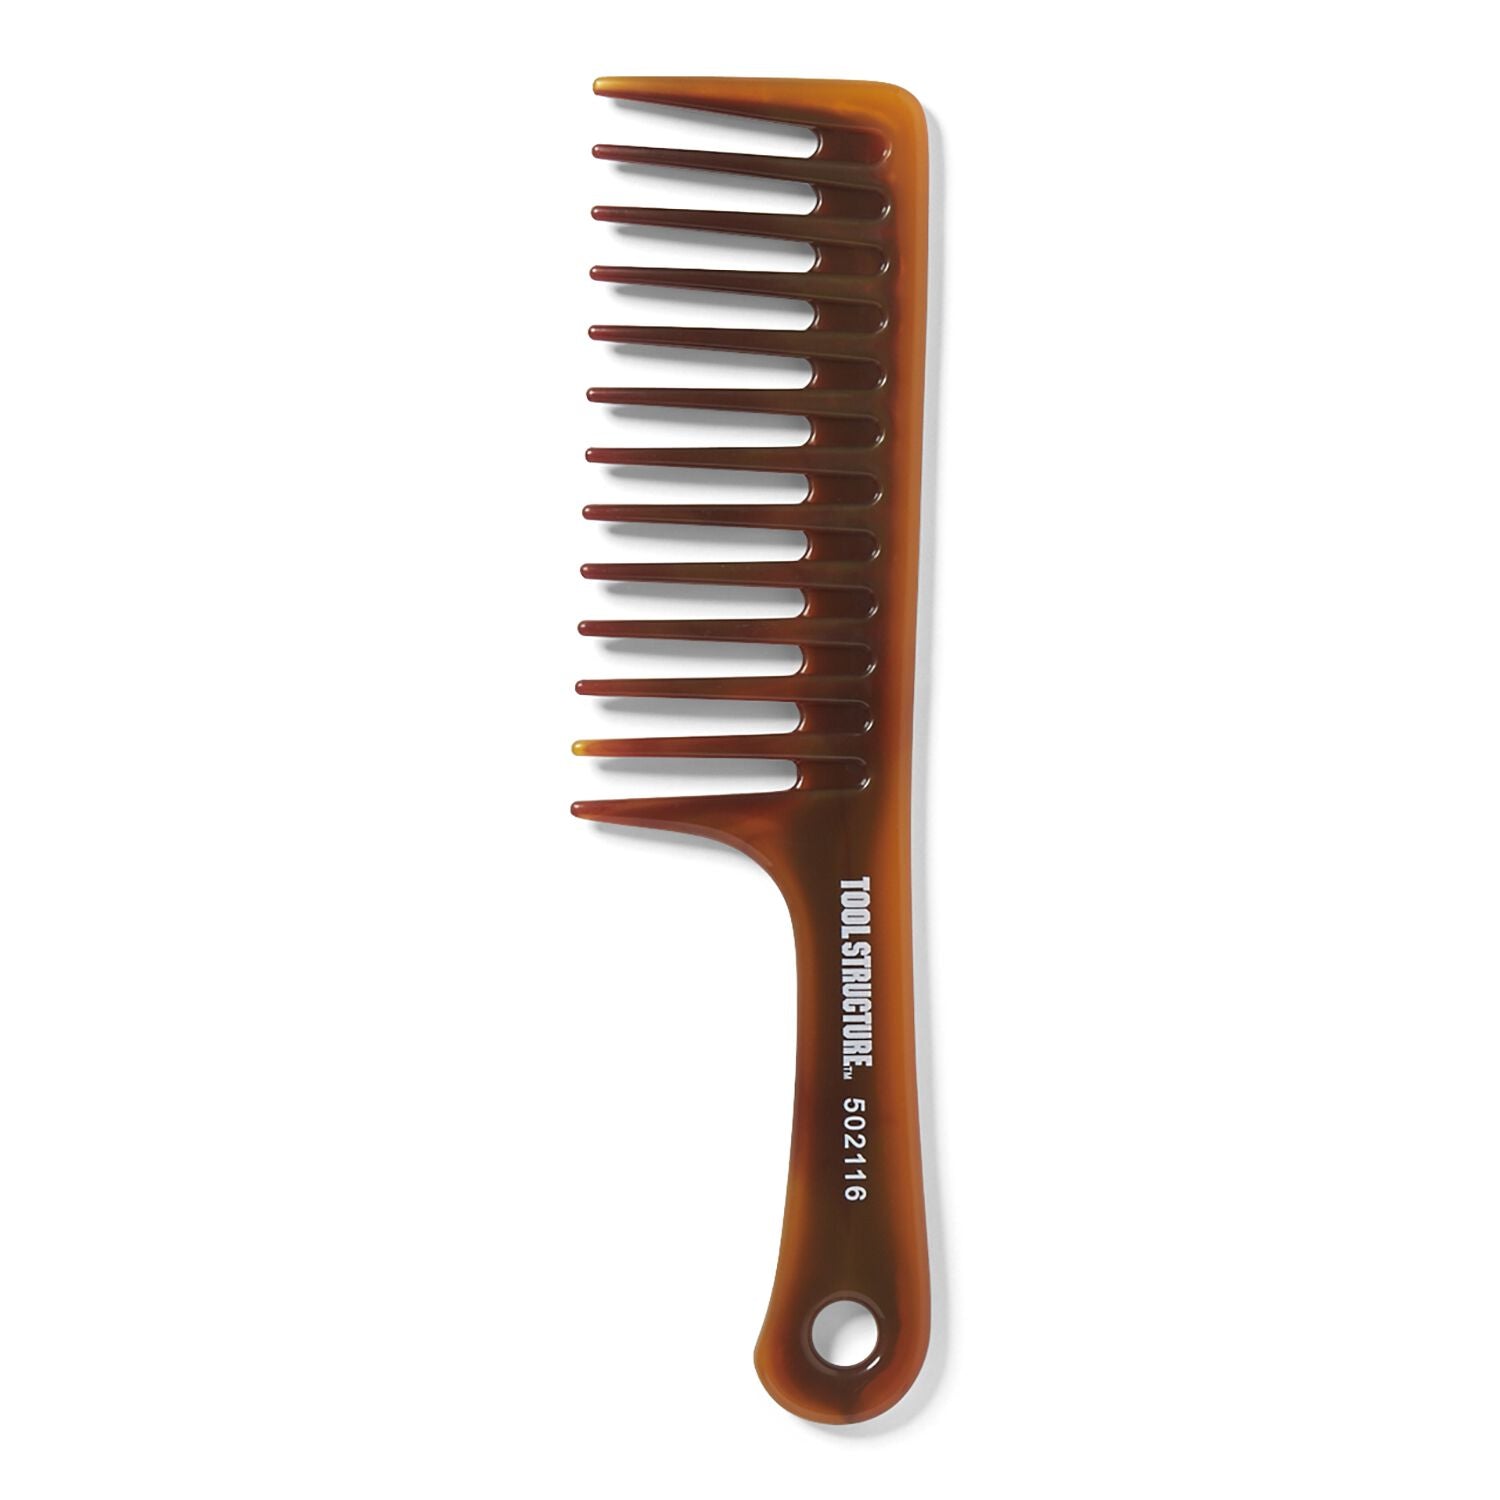 Tool Structure Tortoise Large Handle Comb